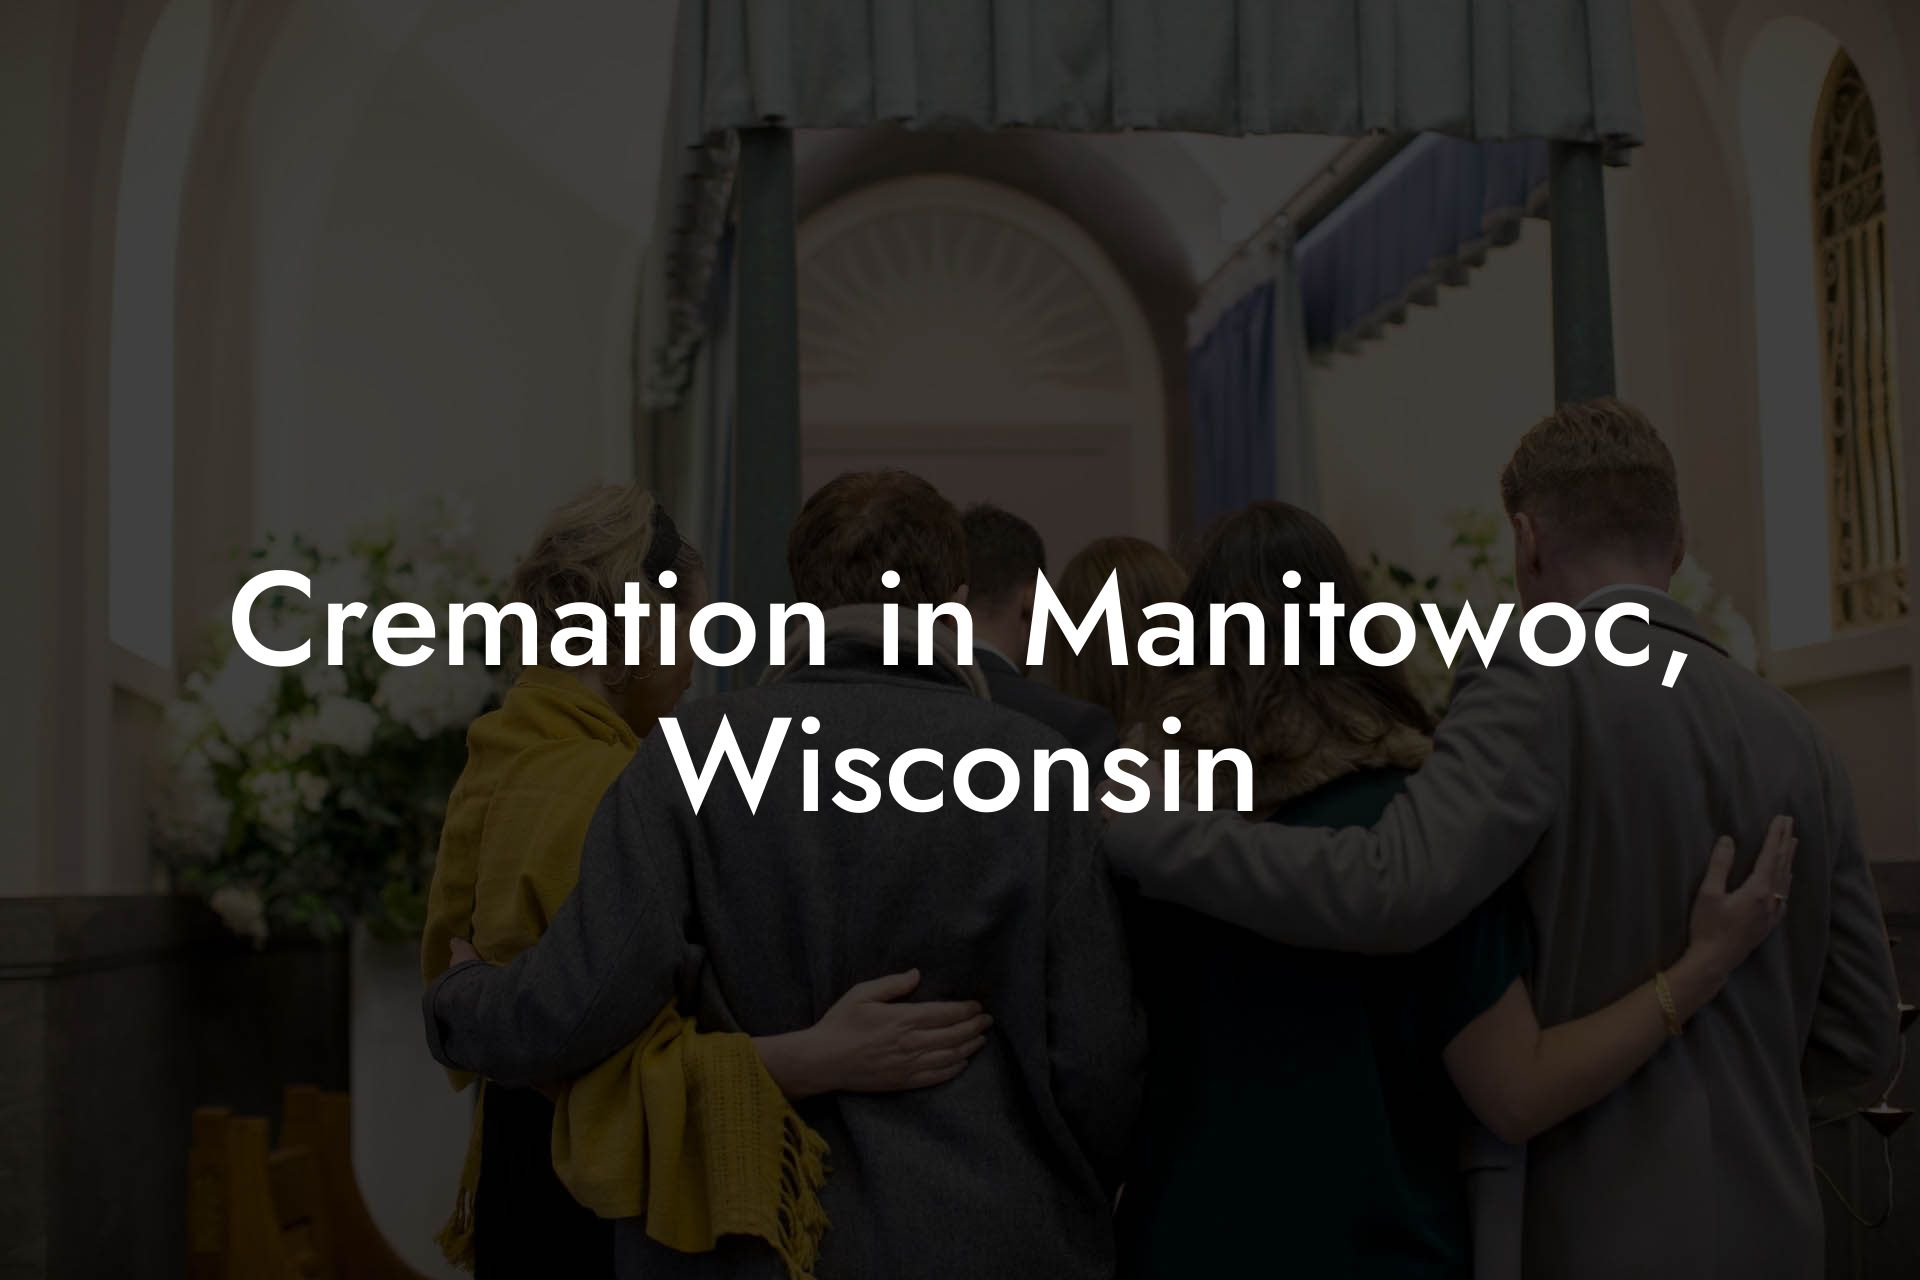 Cremation in Manitowoc, Wisconsin